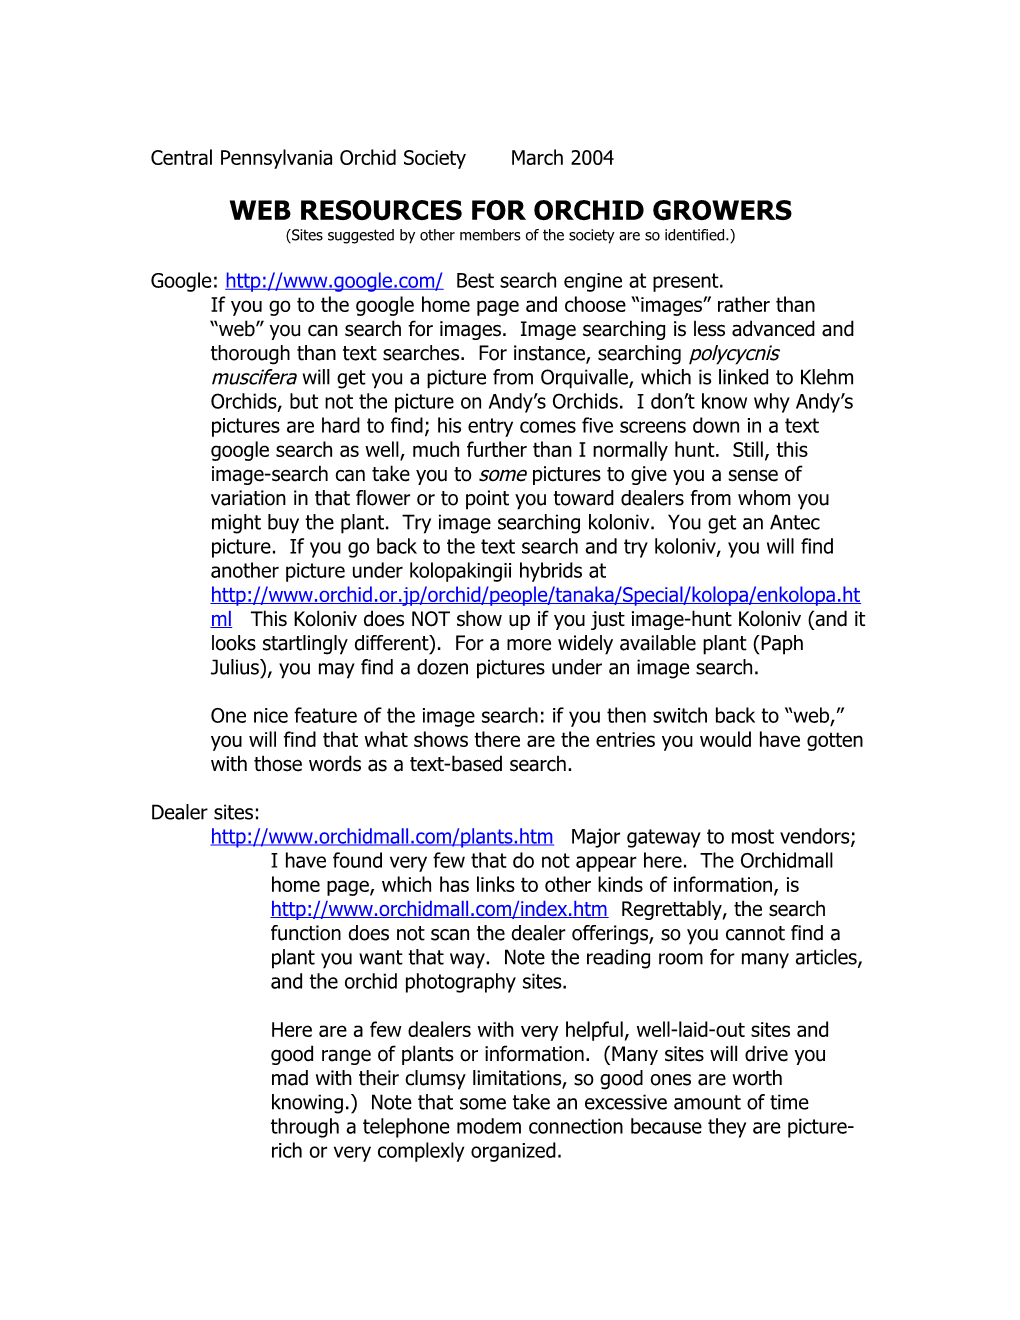 Web Resources for Orchid Growers